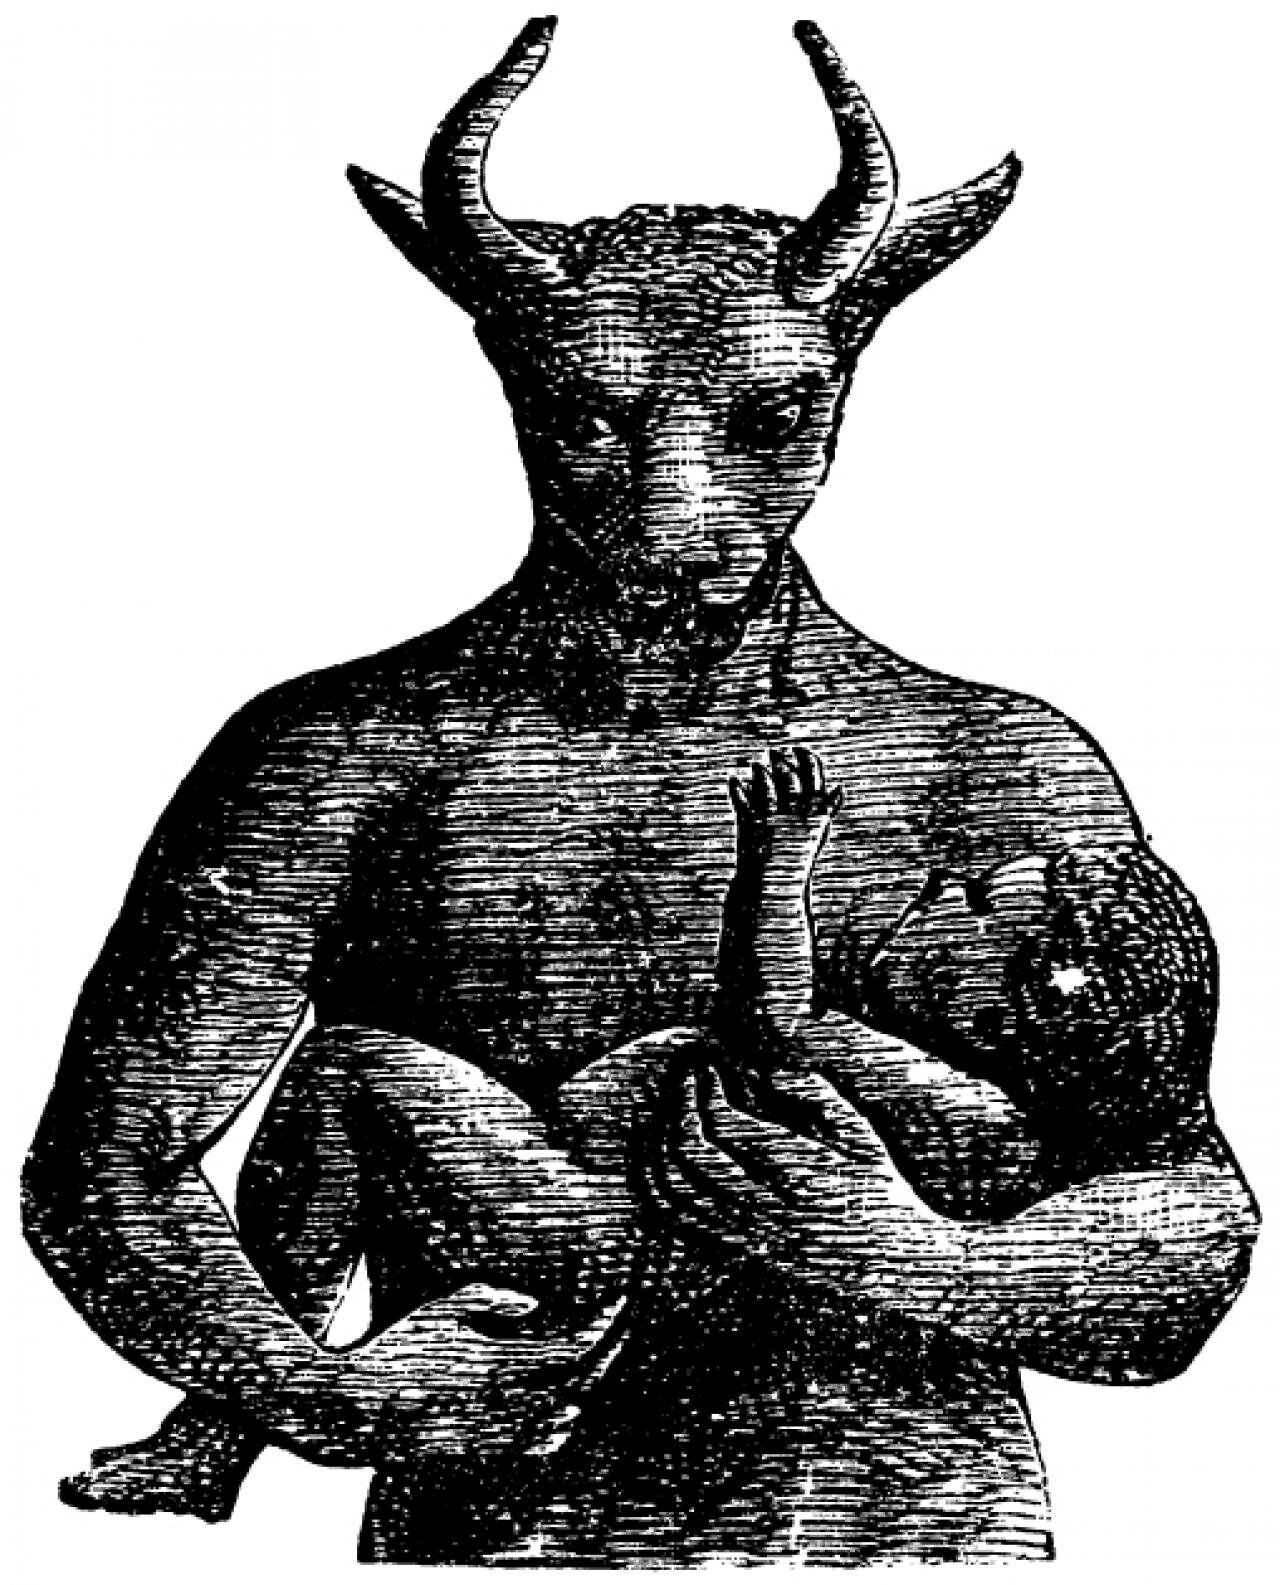 You can see how depictions of Baal might have helped influence Christians’ concept of the Devil (aka Beelzebub).